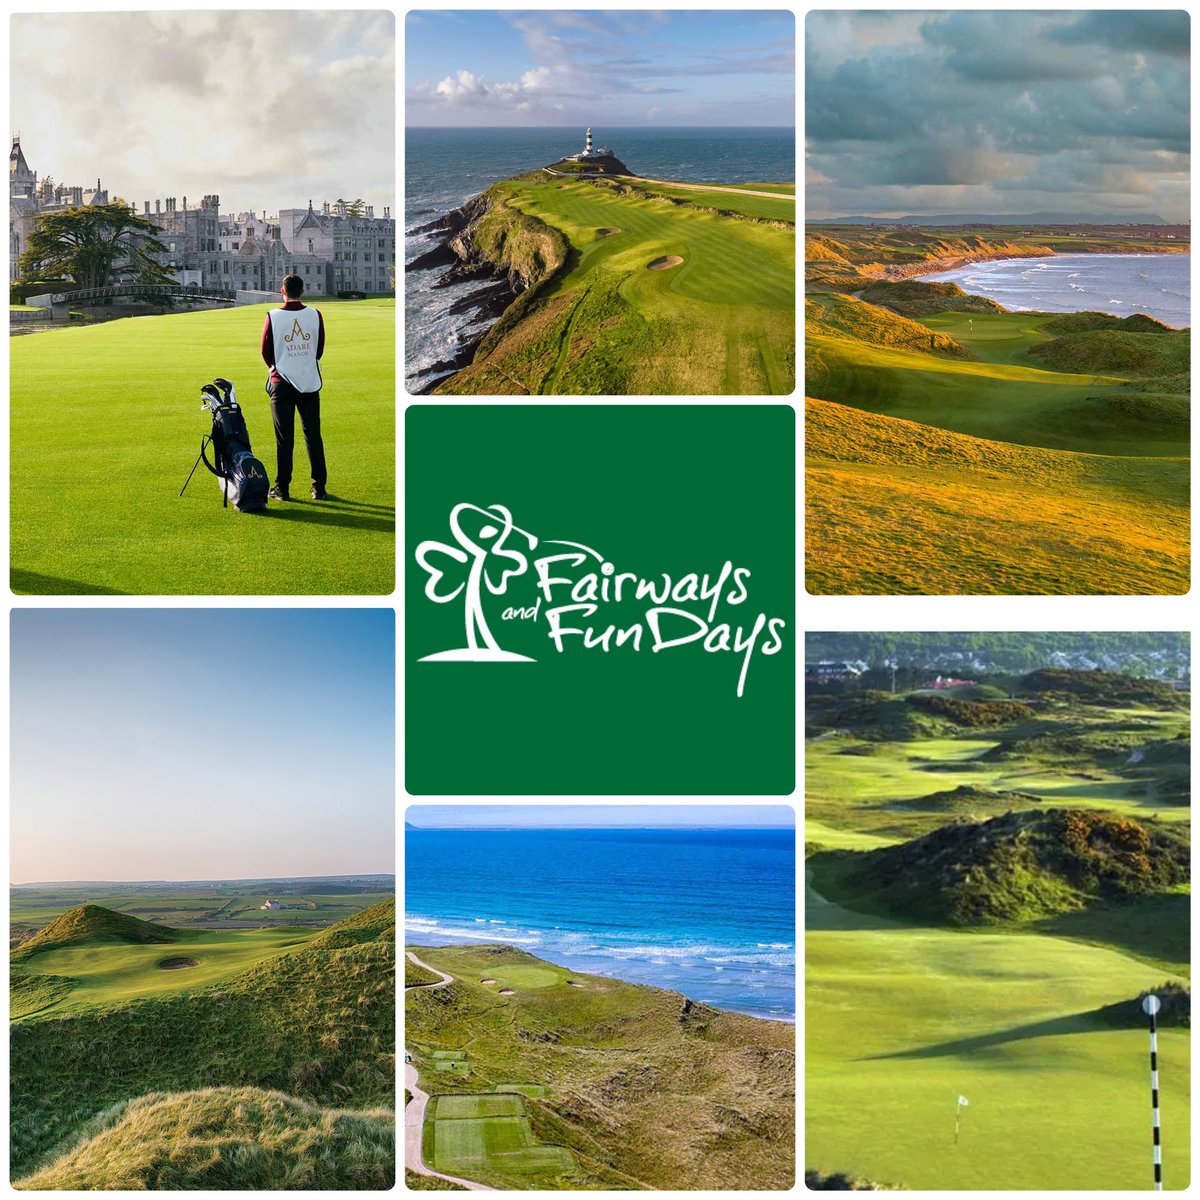 If you had to select one golf course to play for the rest of your days, which one would it be? Tag your favourite in the comments. #ireland #worldclassgolf #linksgolf #parklandgolf #fairwaysandfundays